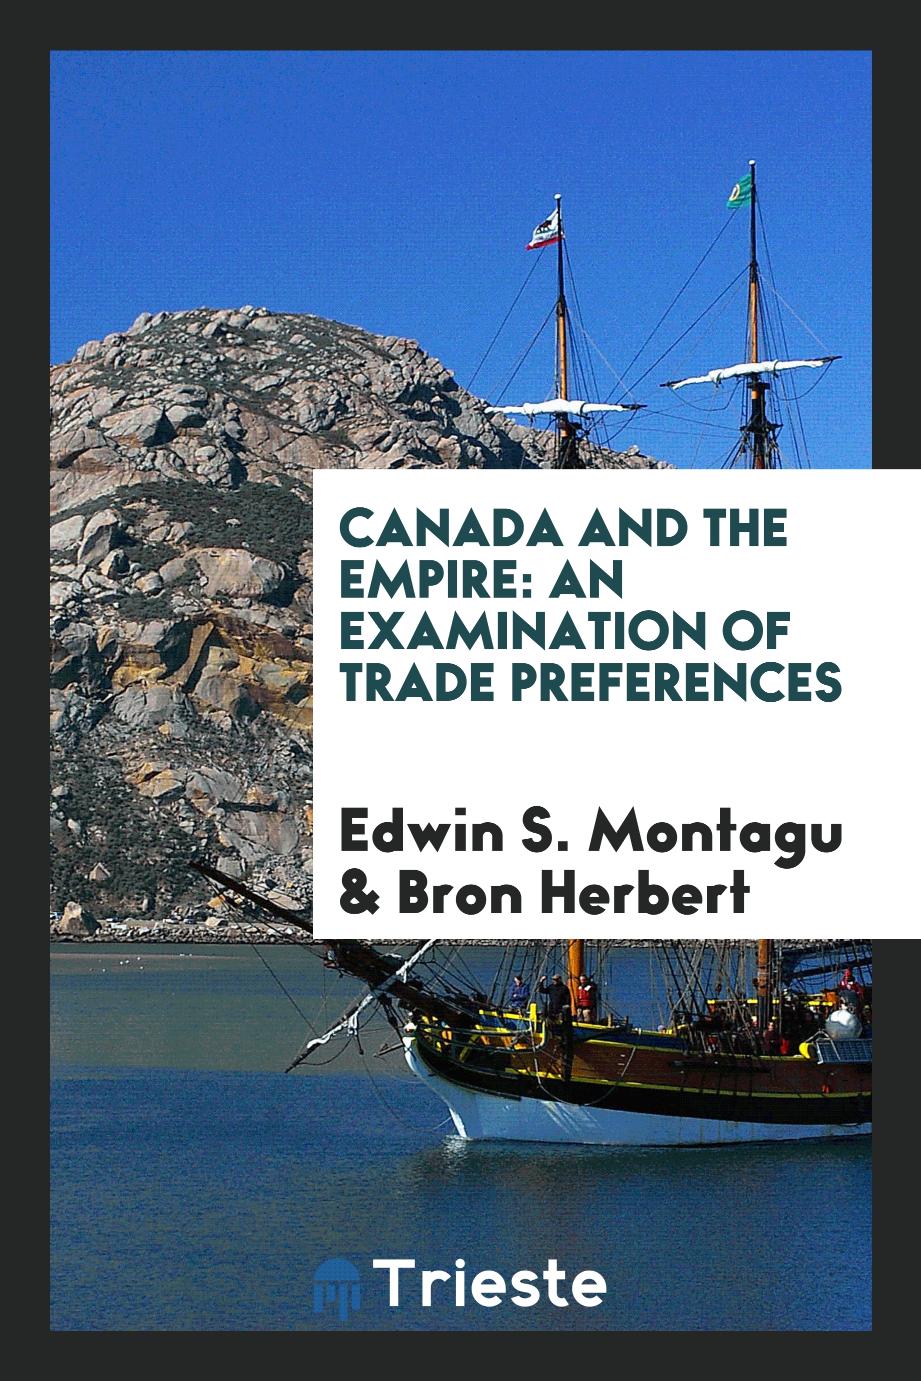 Canada and the Empire: an examination of trade preferences